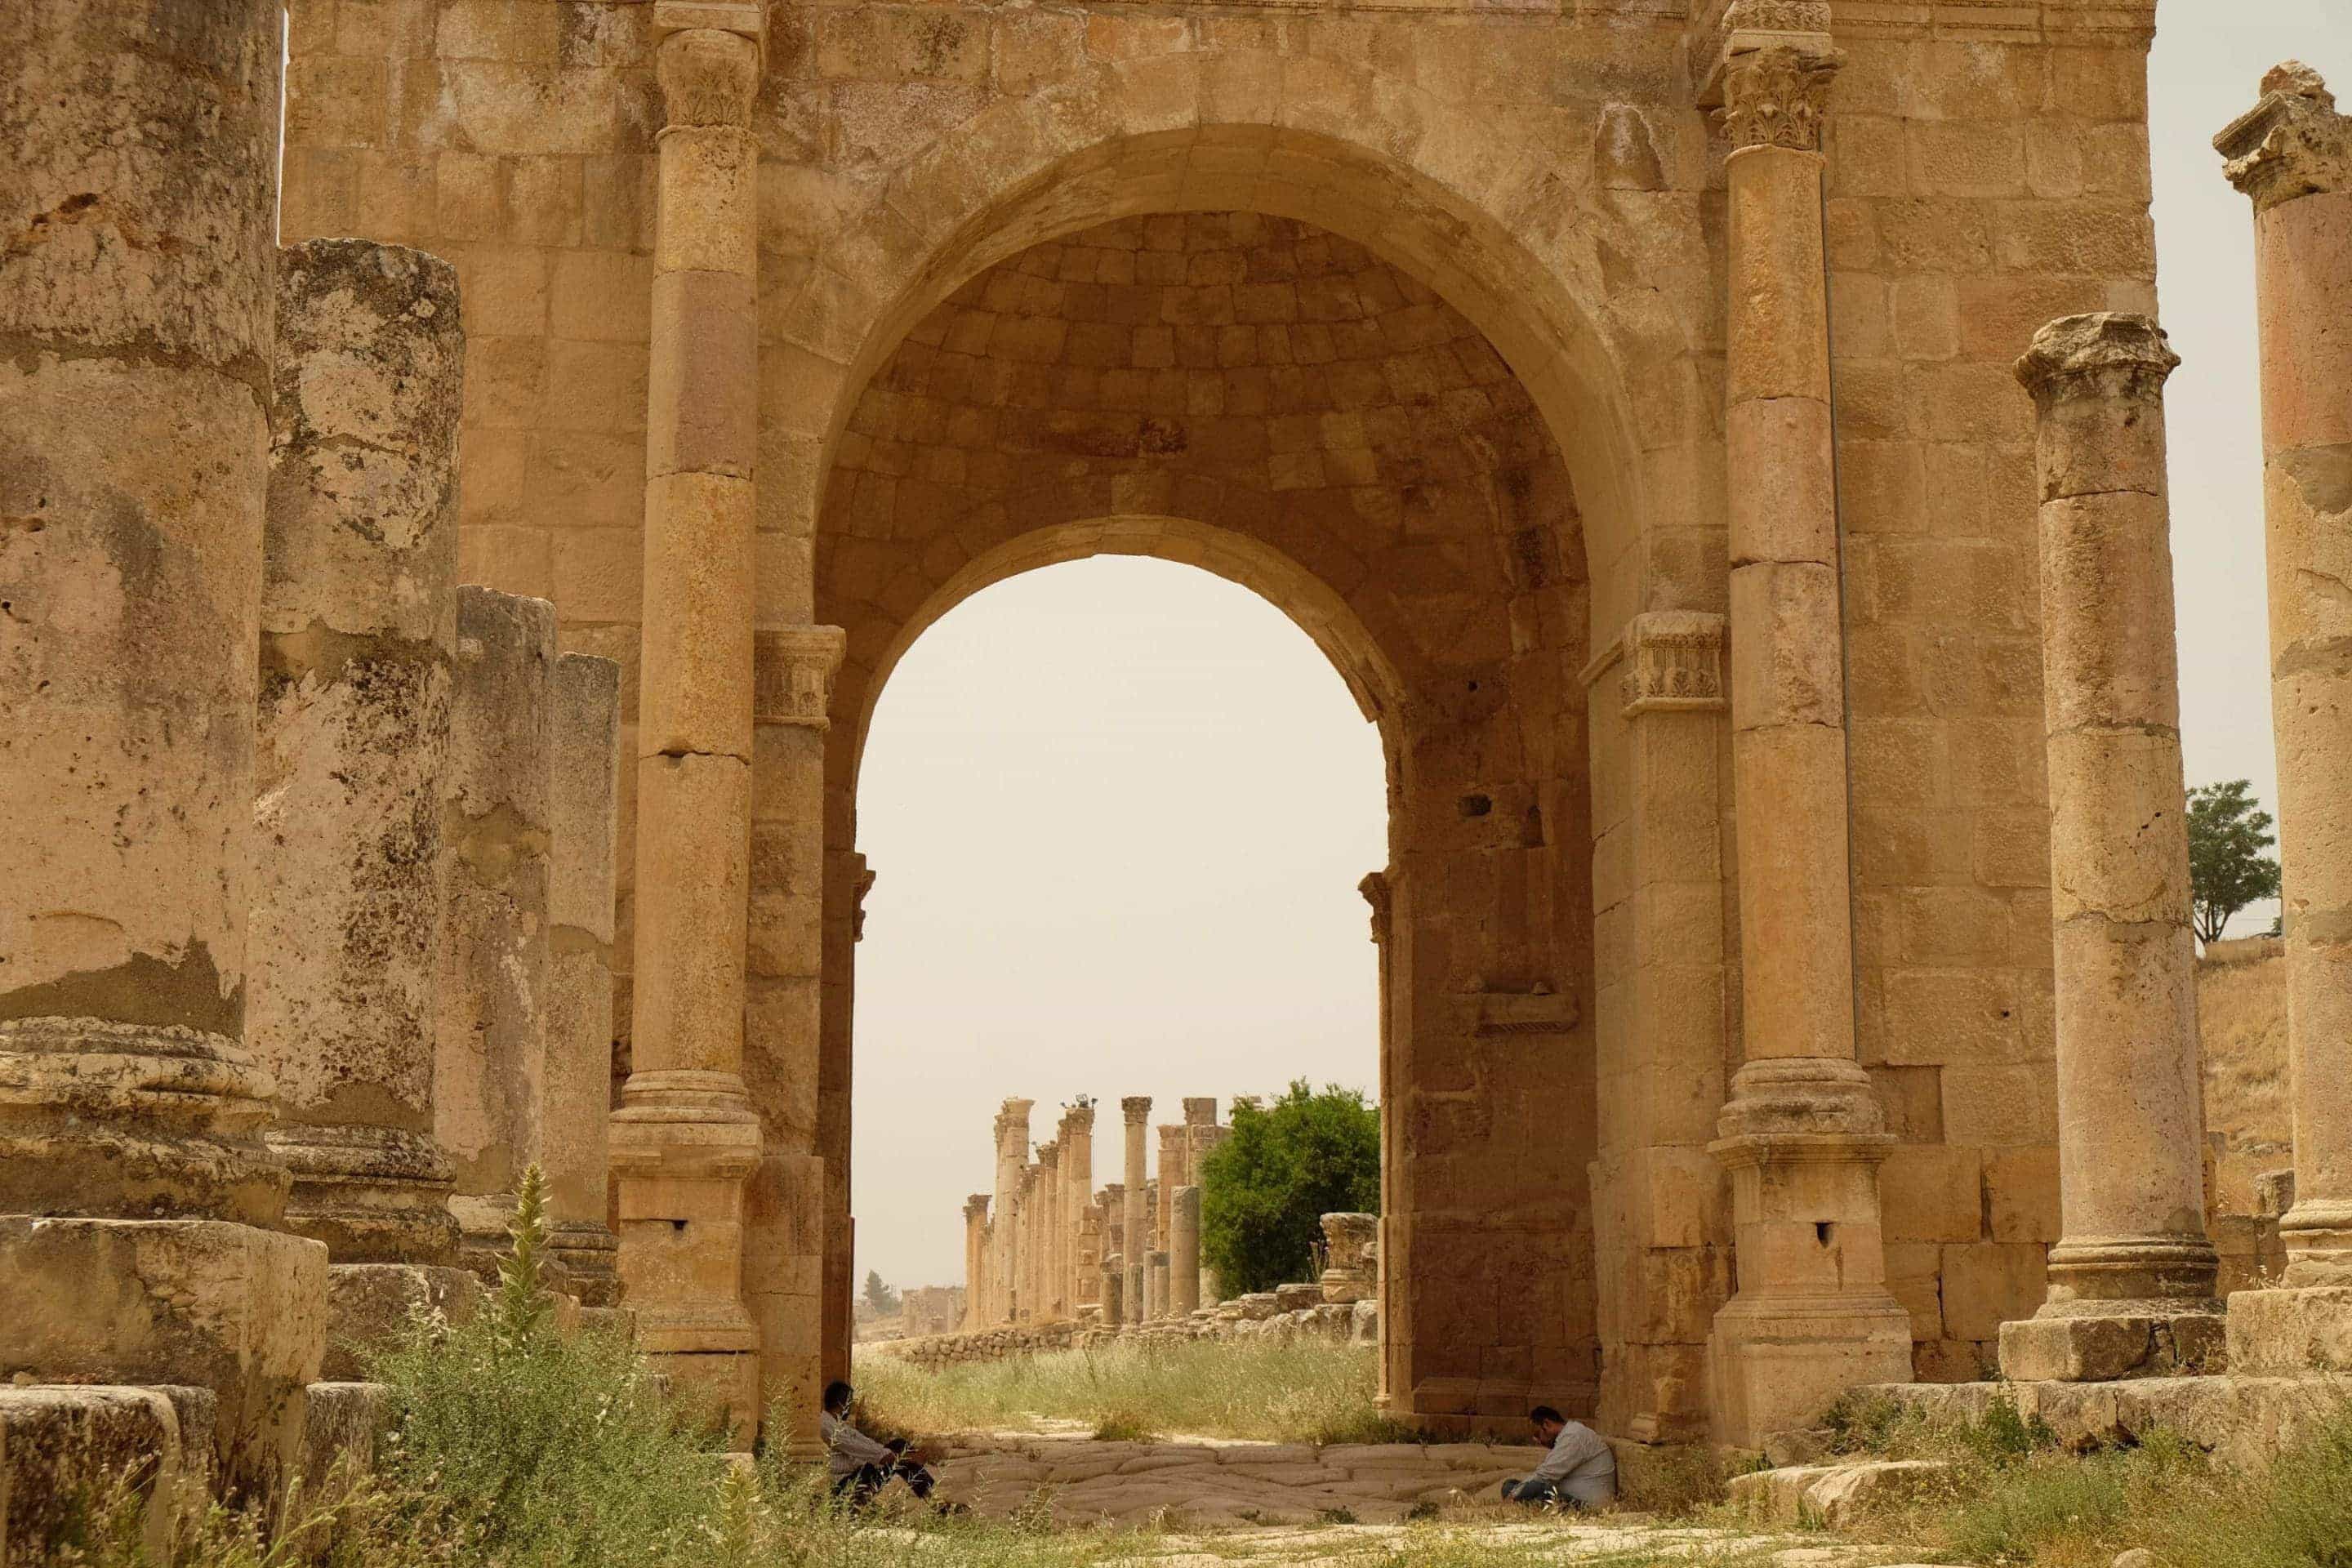 The final gate at Jerash and the end of the colonnaded street. Photo: Genevieve Hathaway Photography.